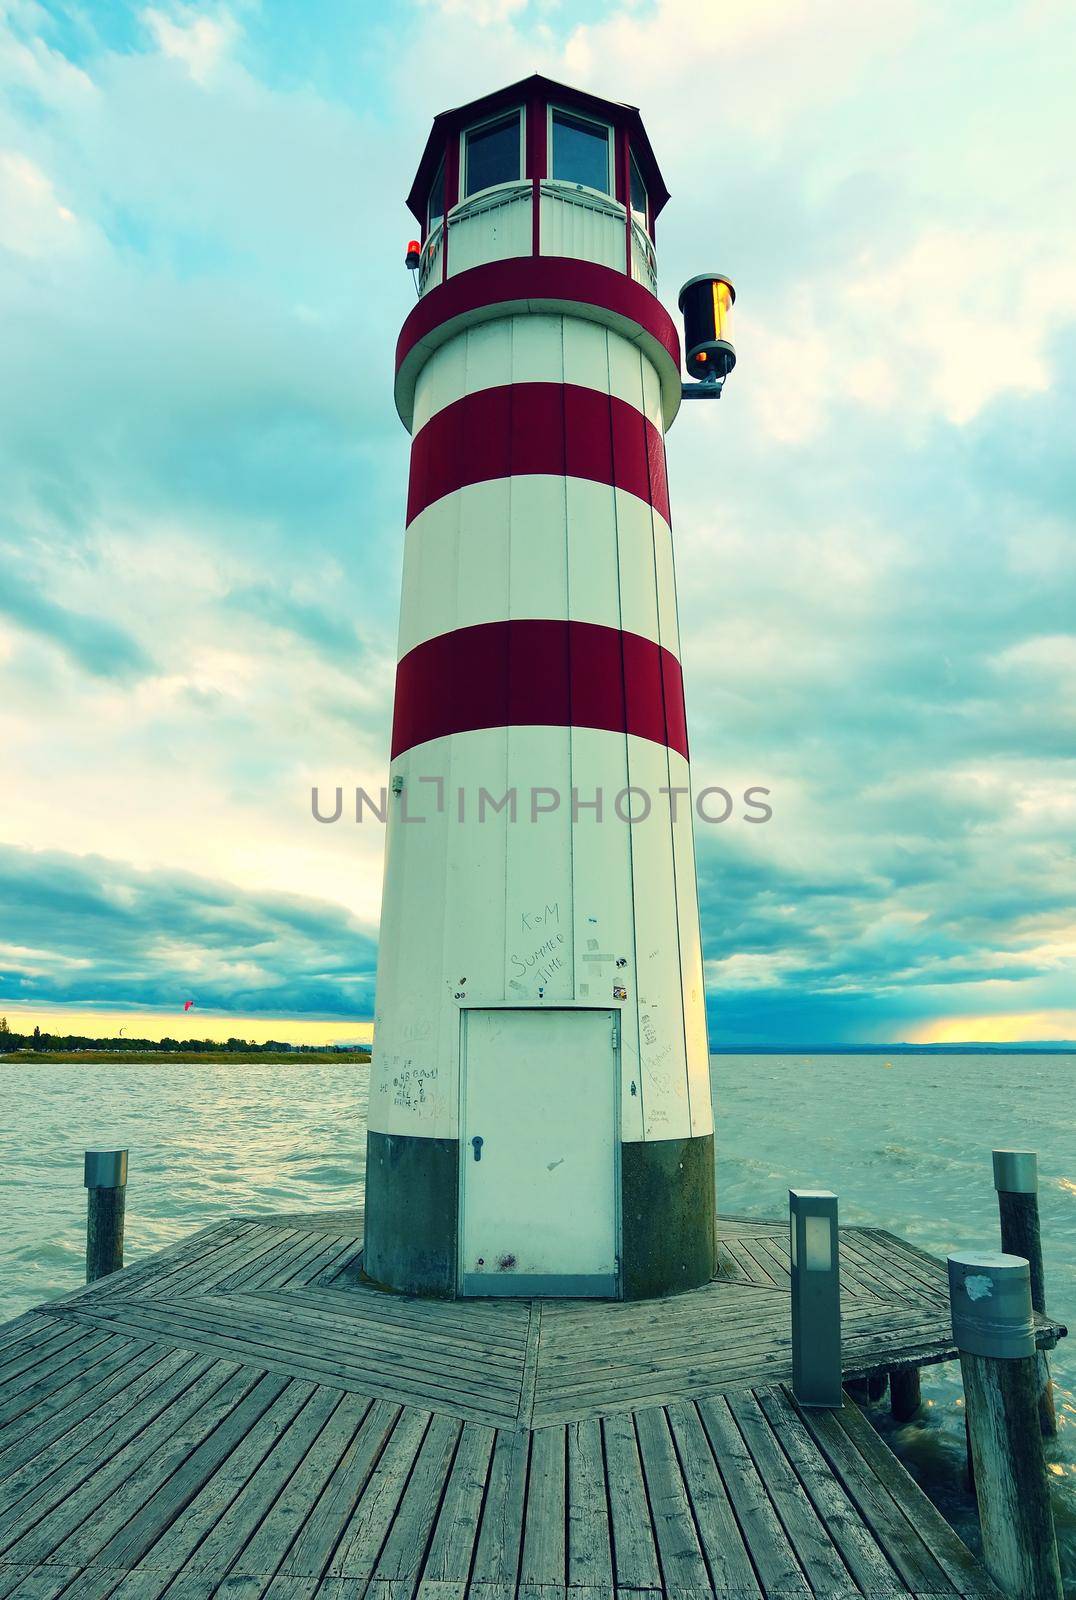 Romantic evening walk on wooden mole to Lighthouse at Lake Neusiedl (Podersdorf am See) at sunset, Burgenland, Austria